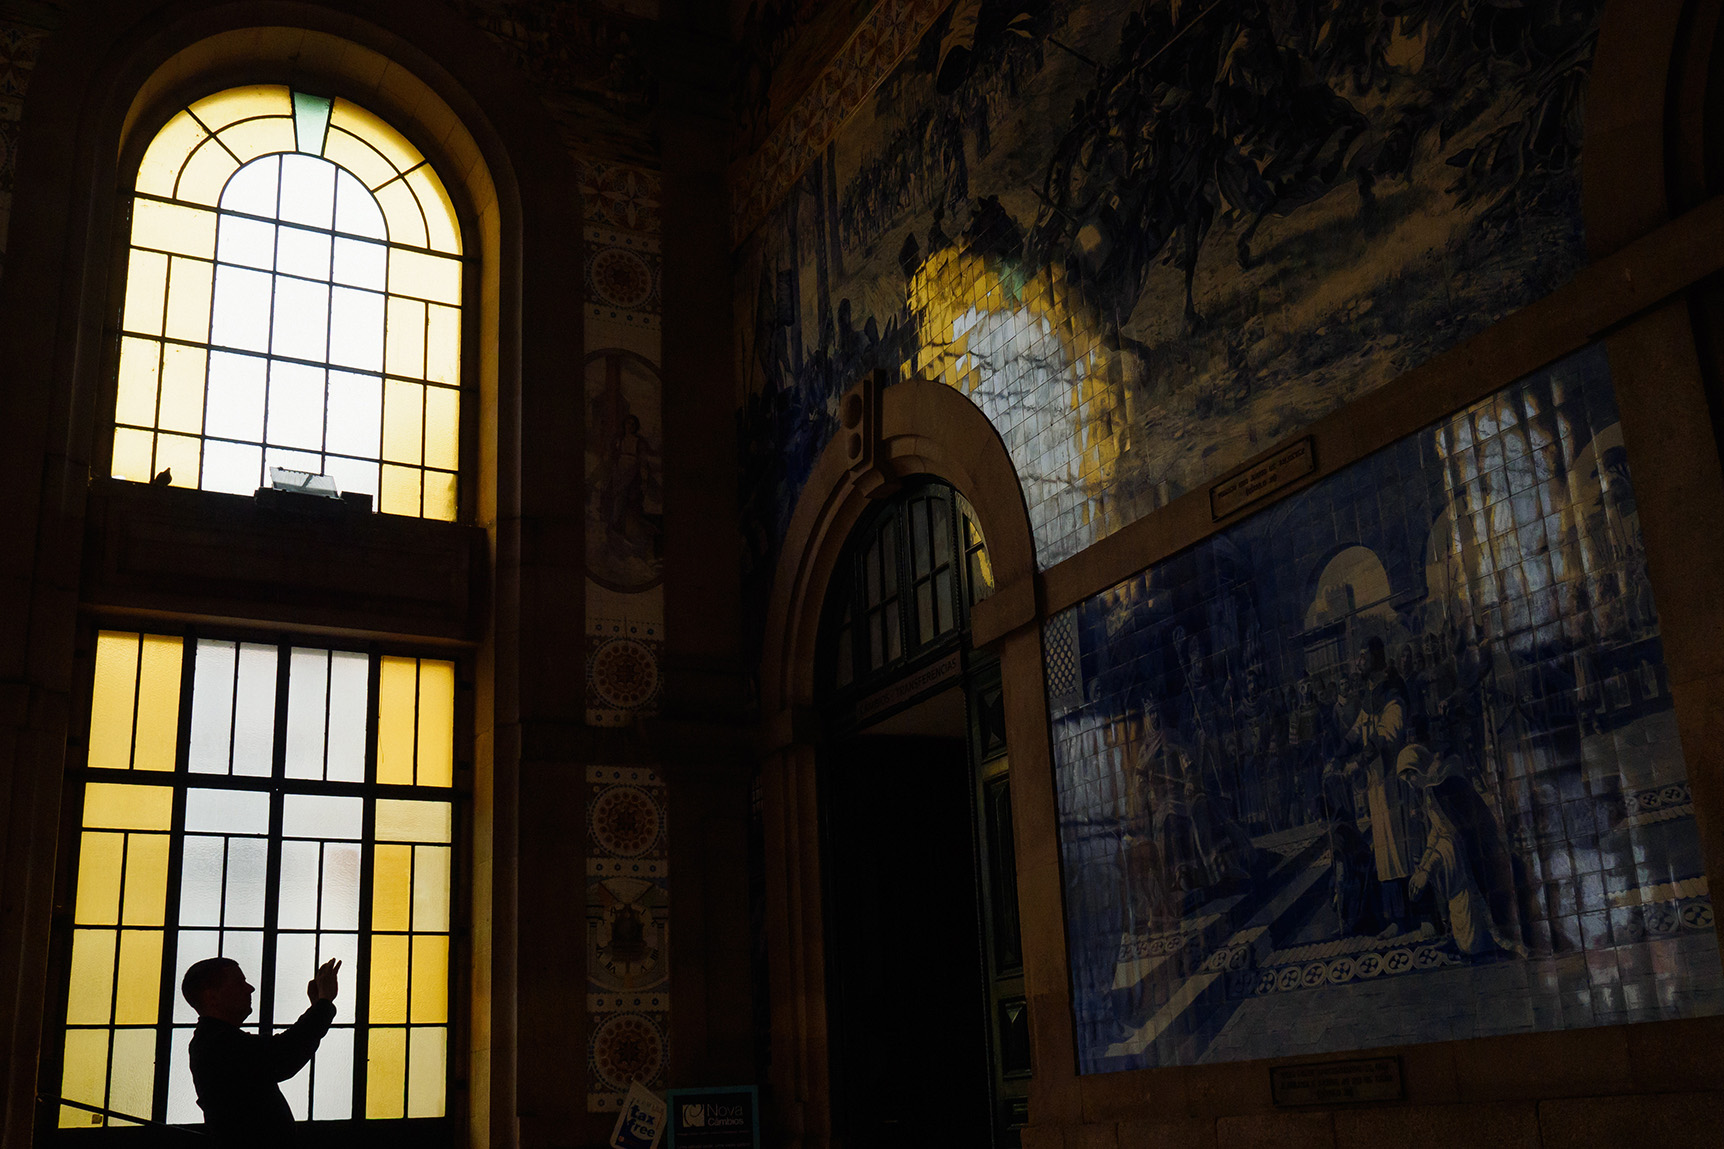 Silhouette of a man taking a photograph at the Sao Bento train station in Porto